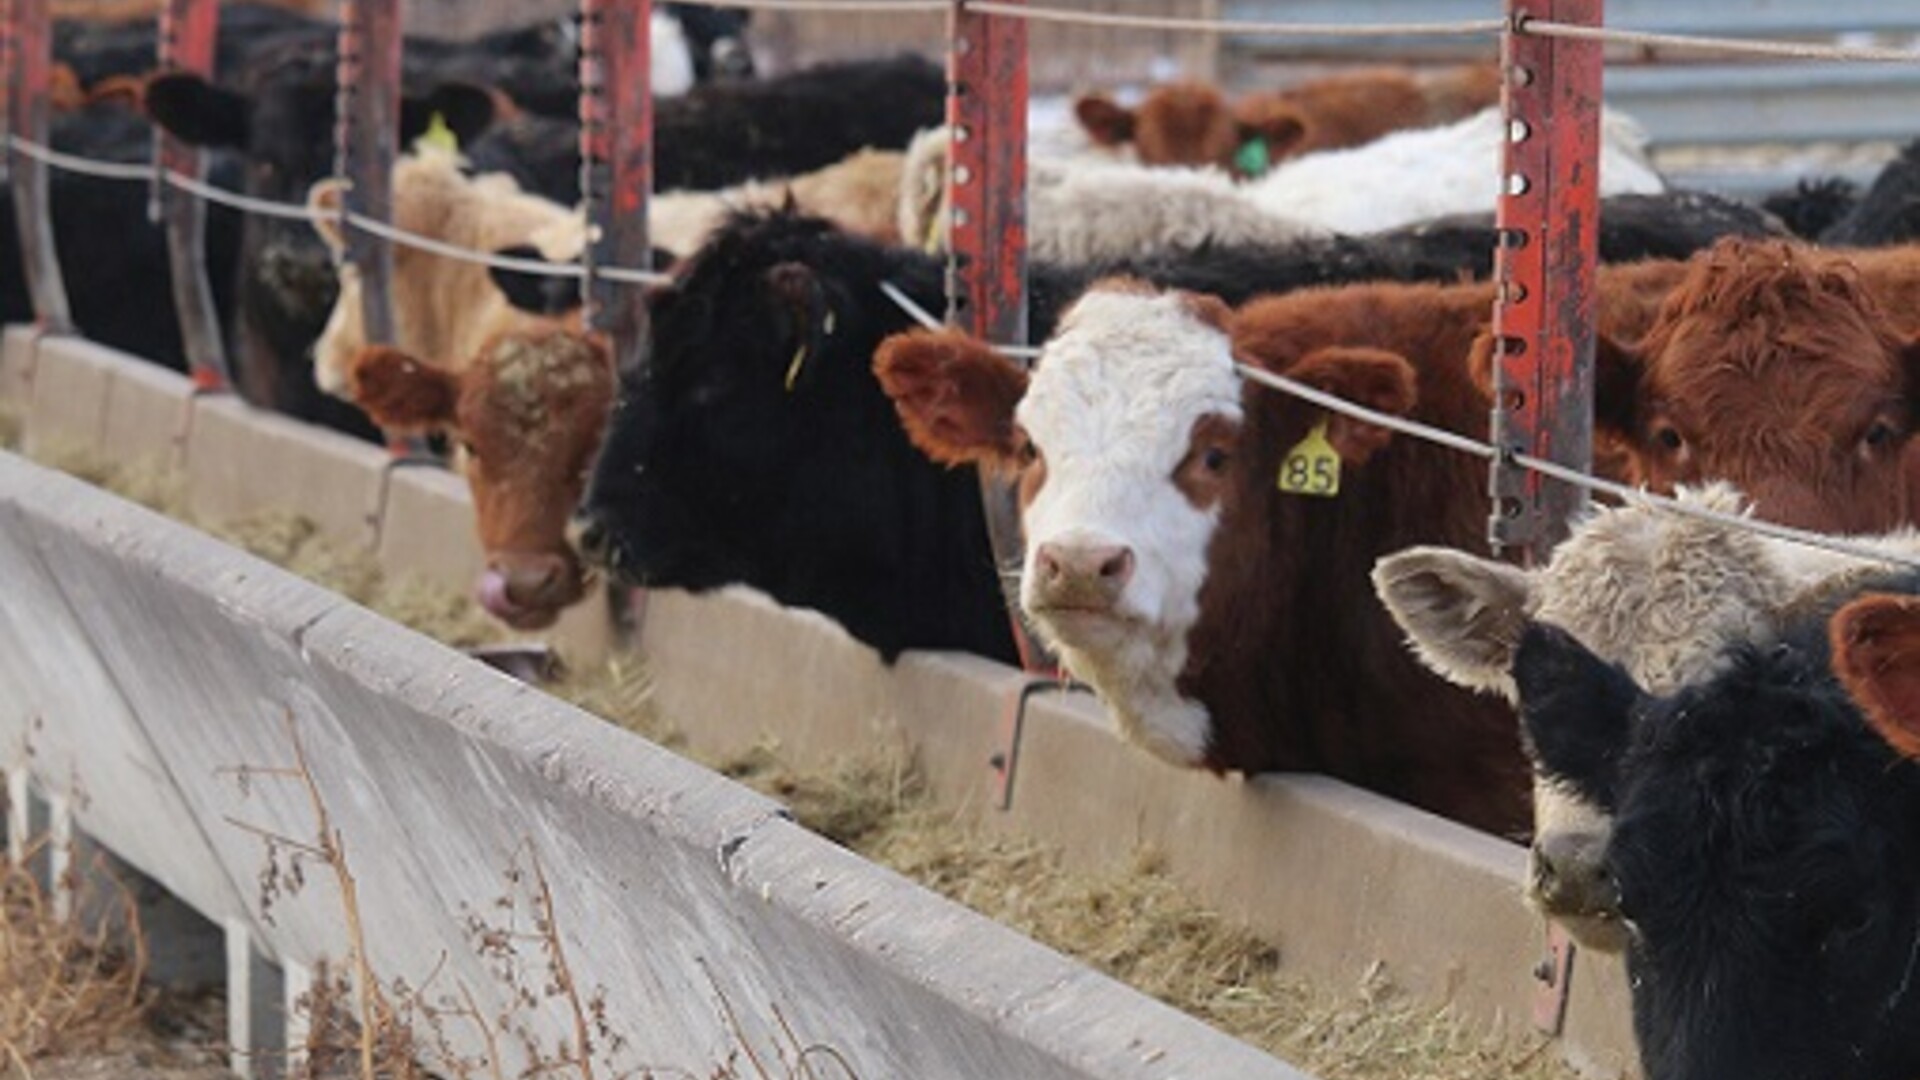 North American Cattle Groups Work to Prevent Disease